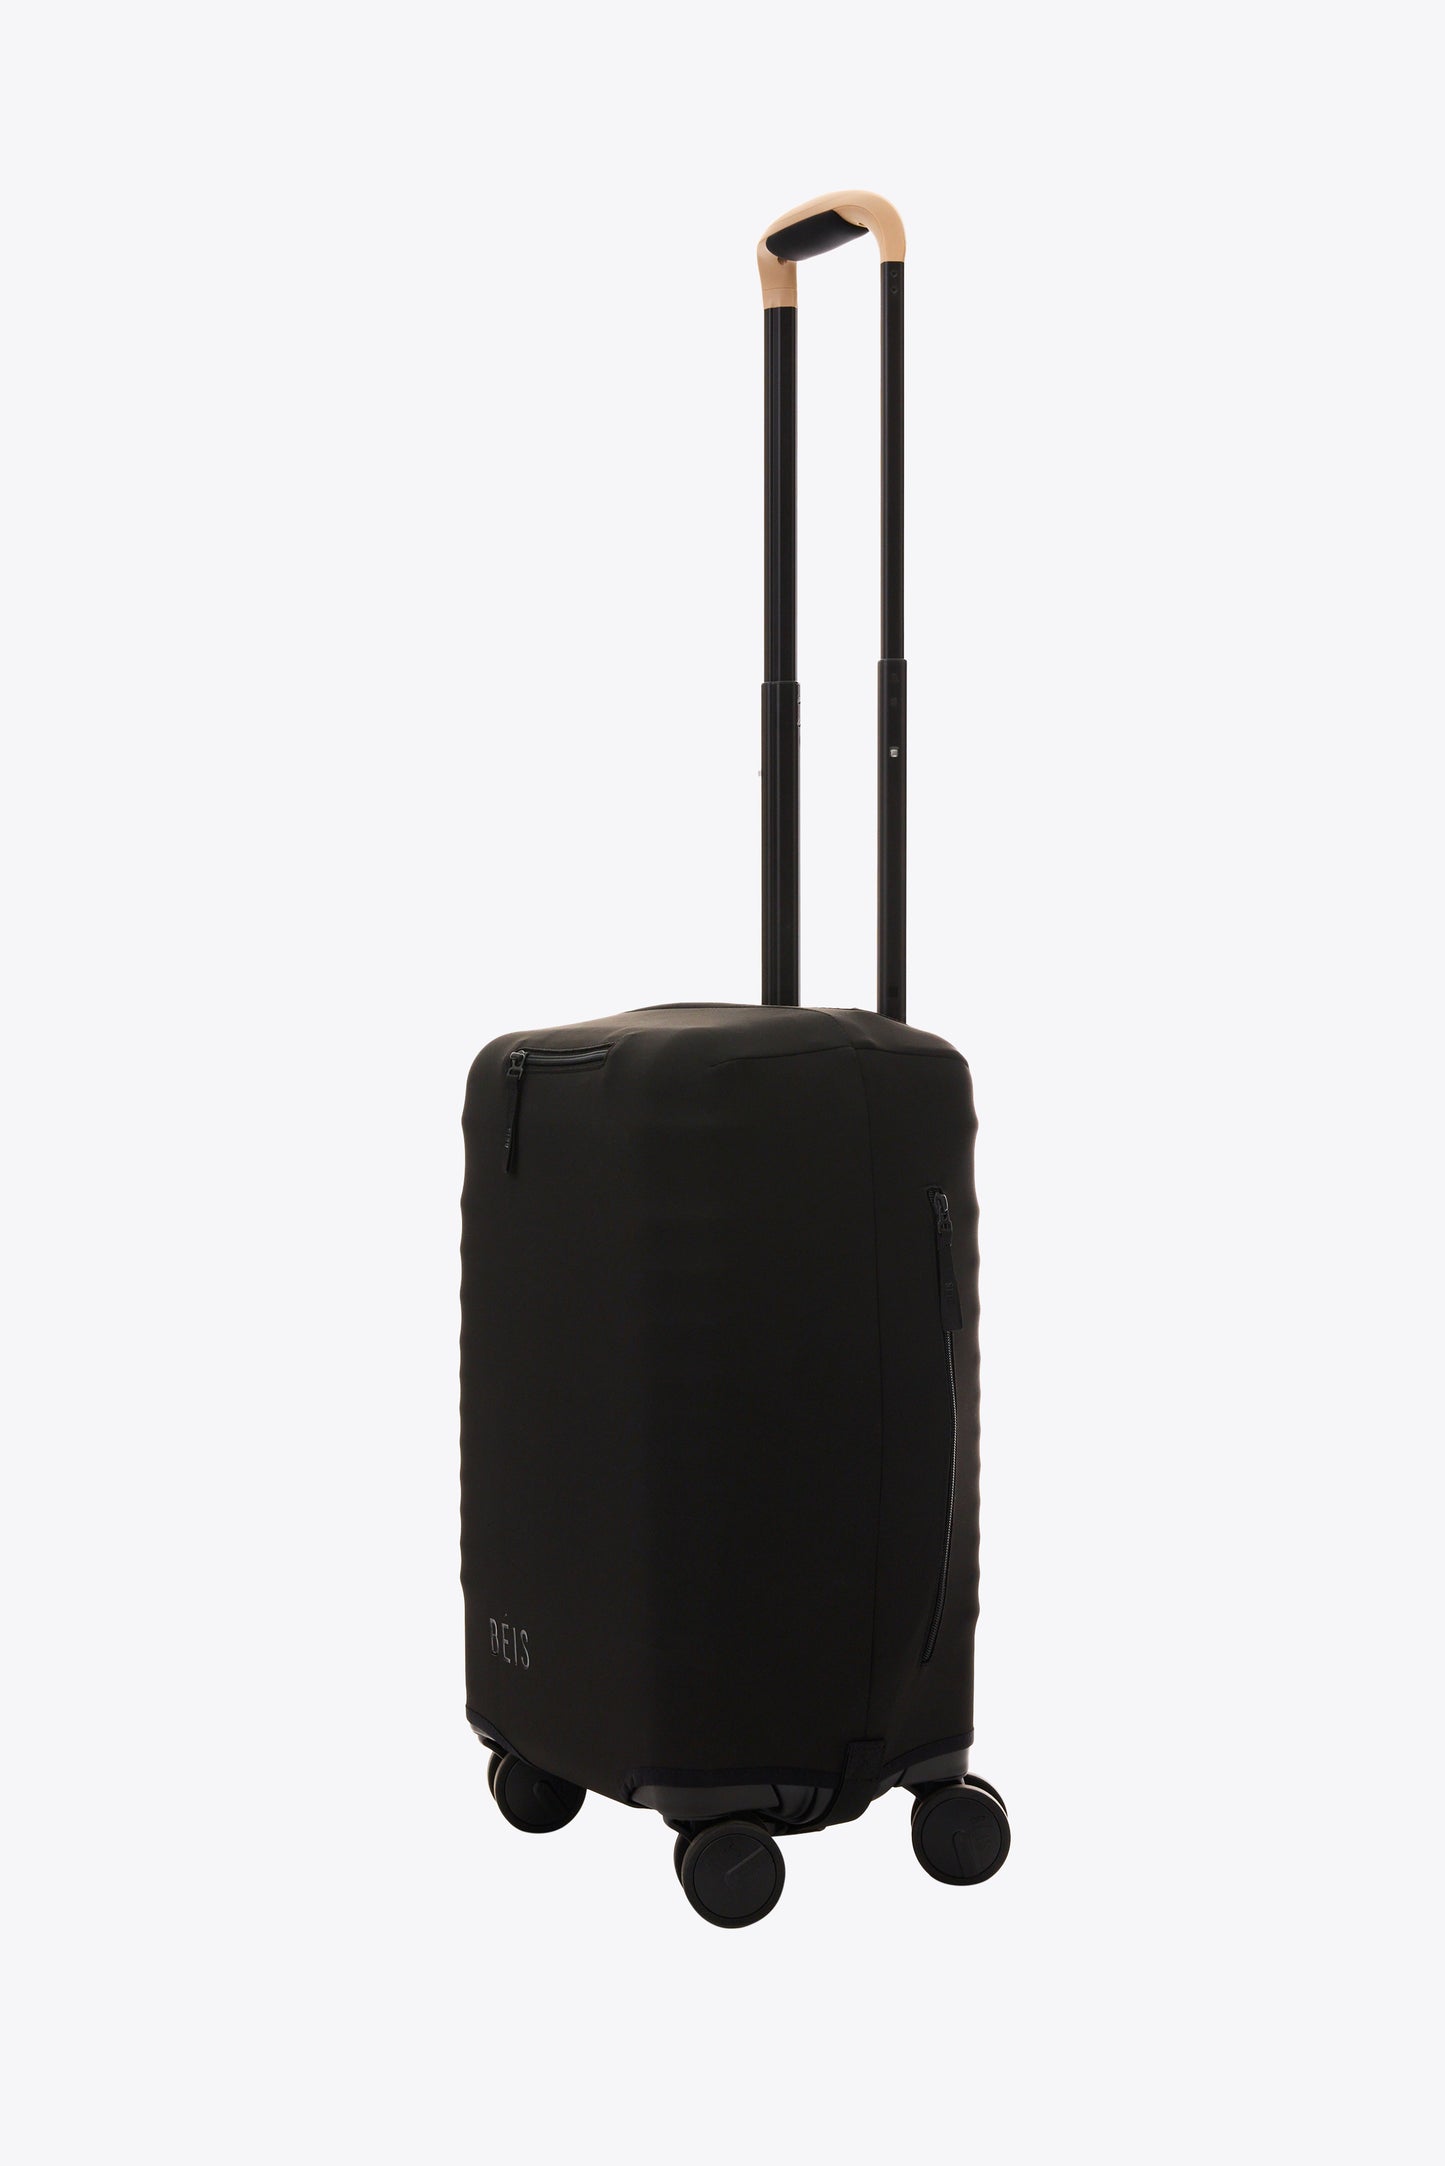 The Small Carry-On Luggage Cover in Black